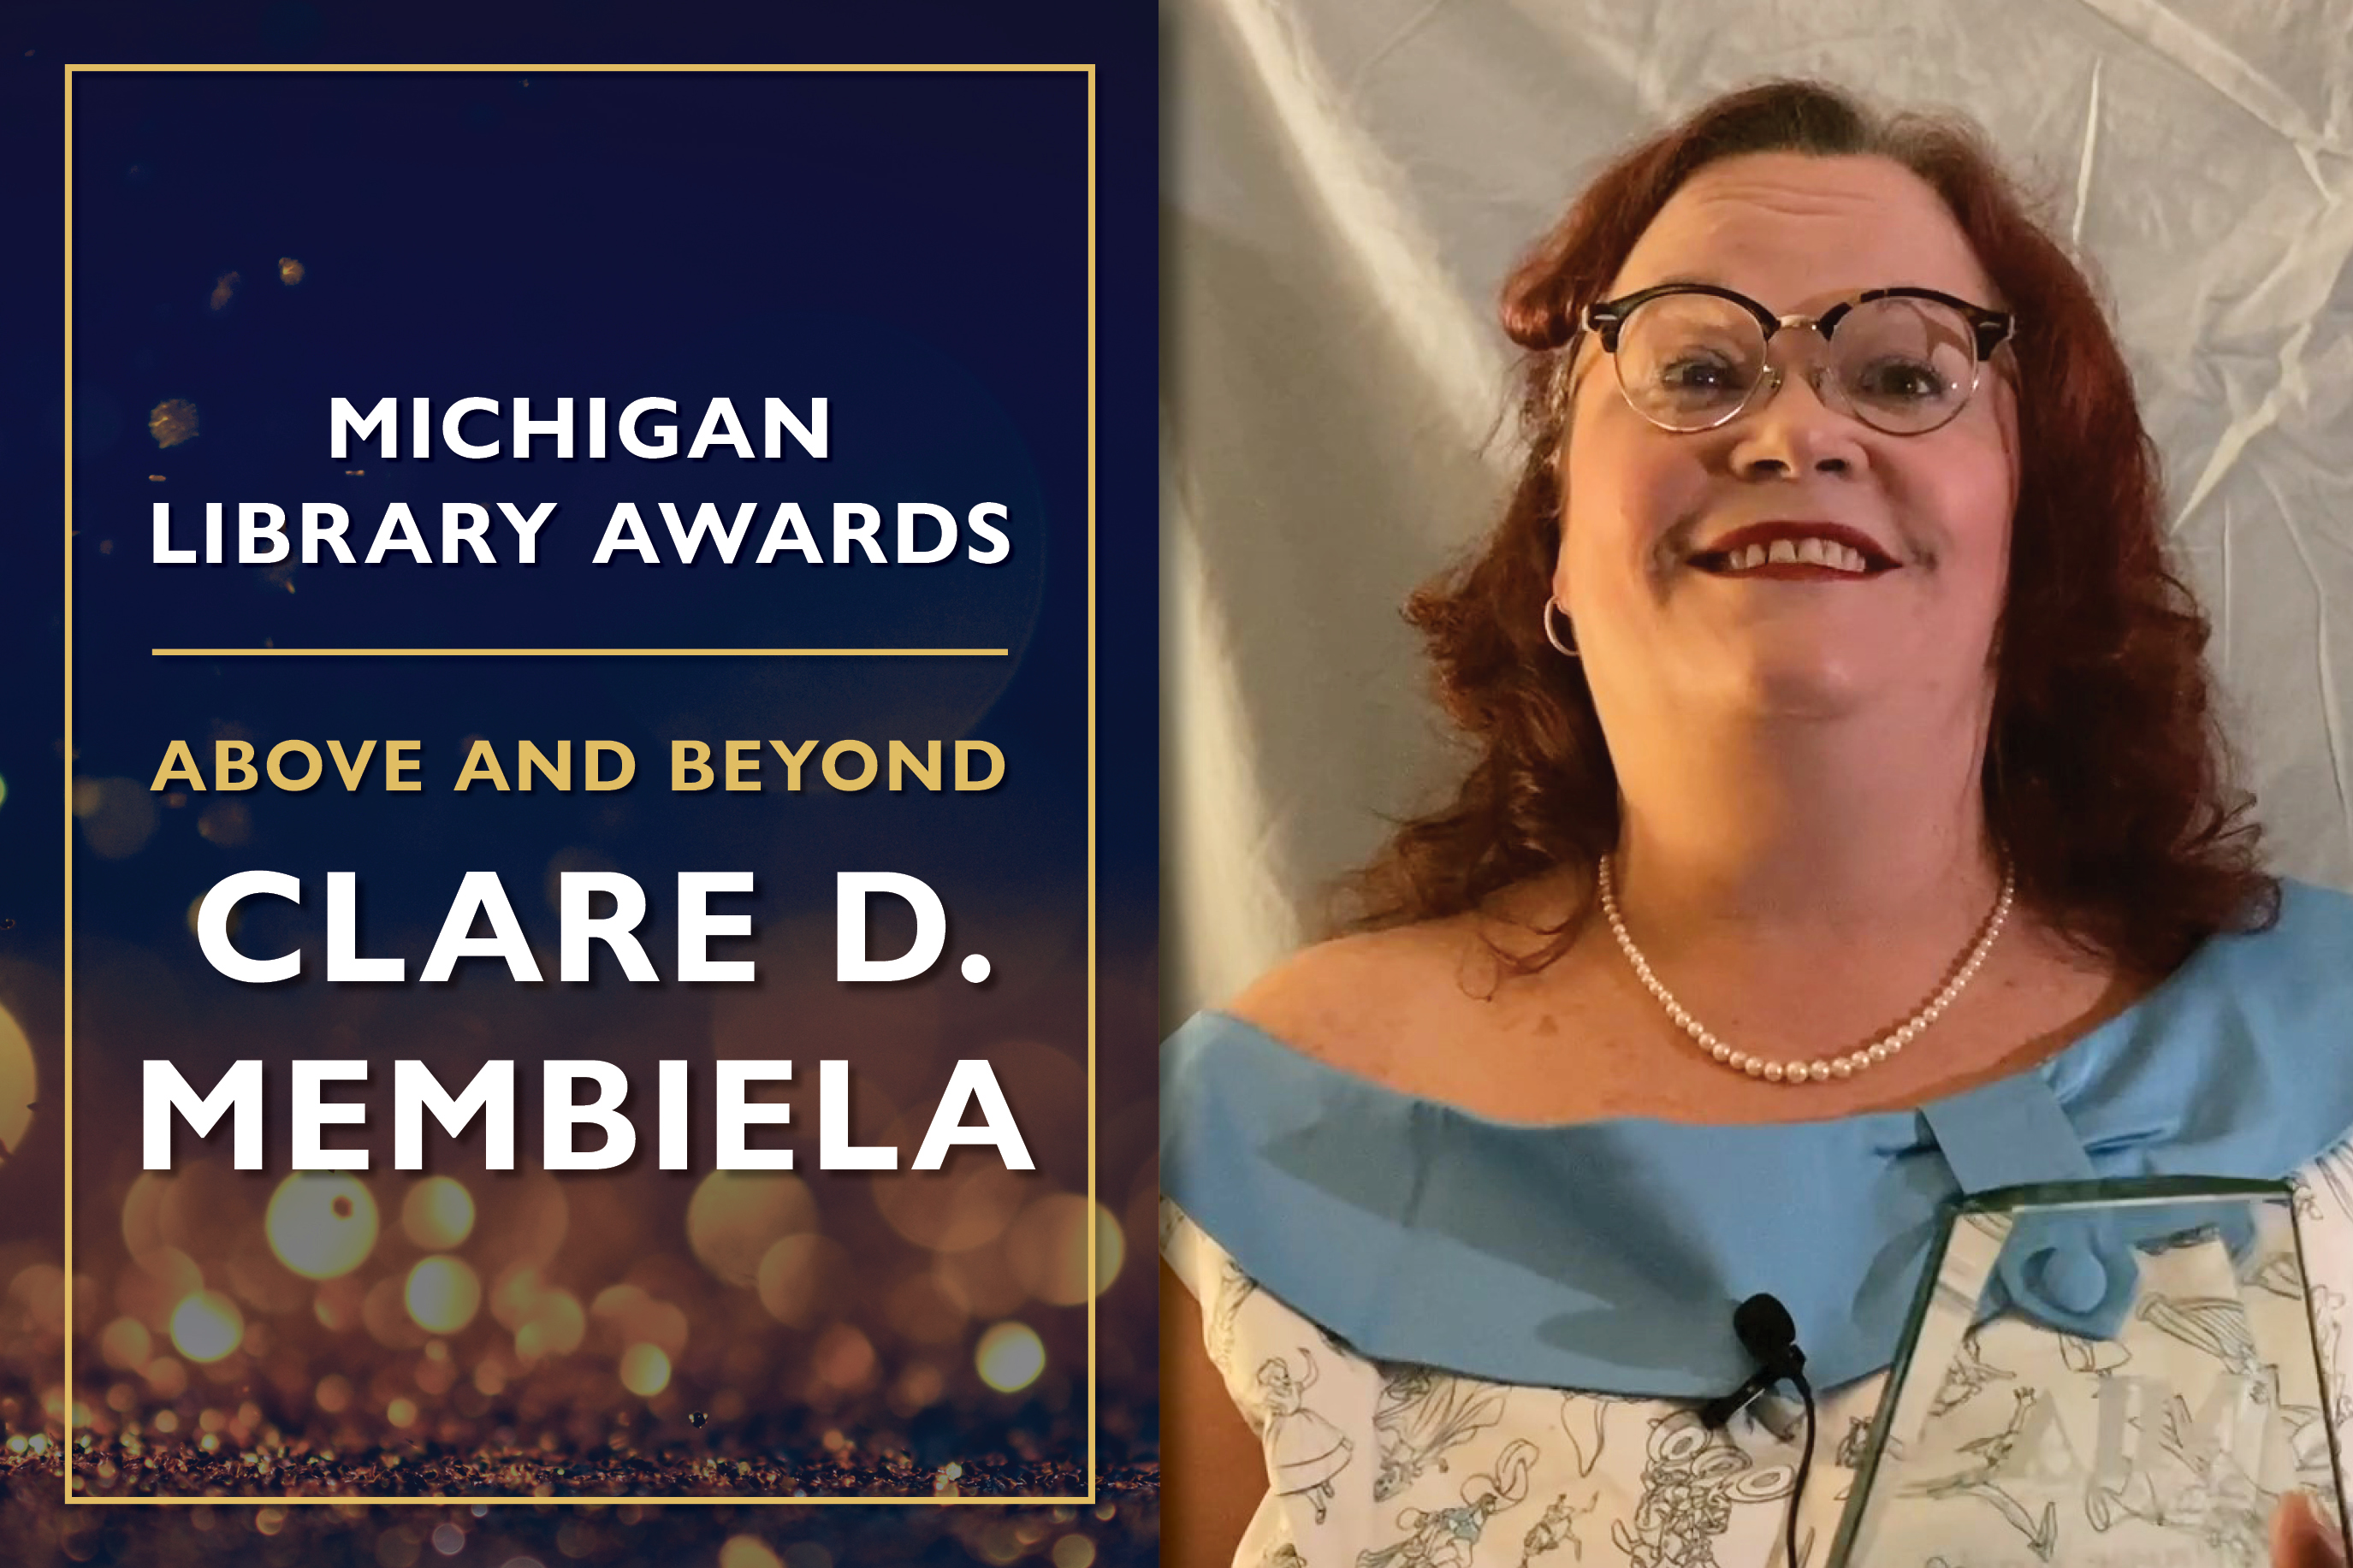 Above and Beyond  Clare D. Membiela, Library Law Consultant at the Library of Michigan 